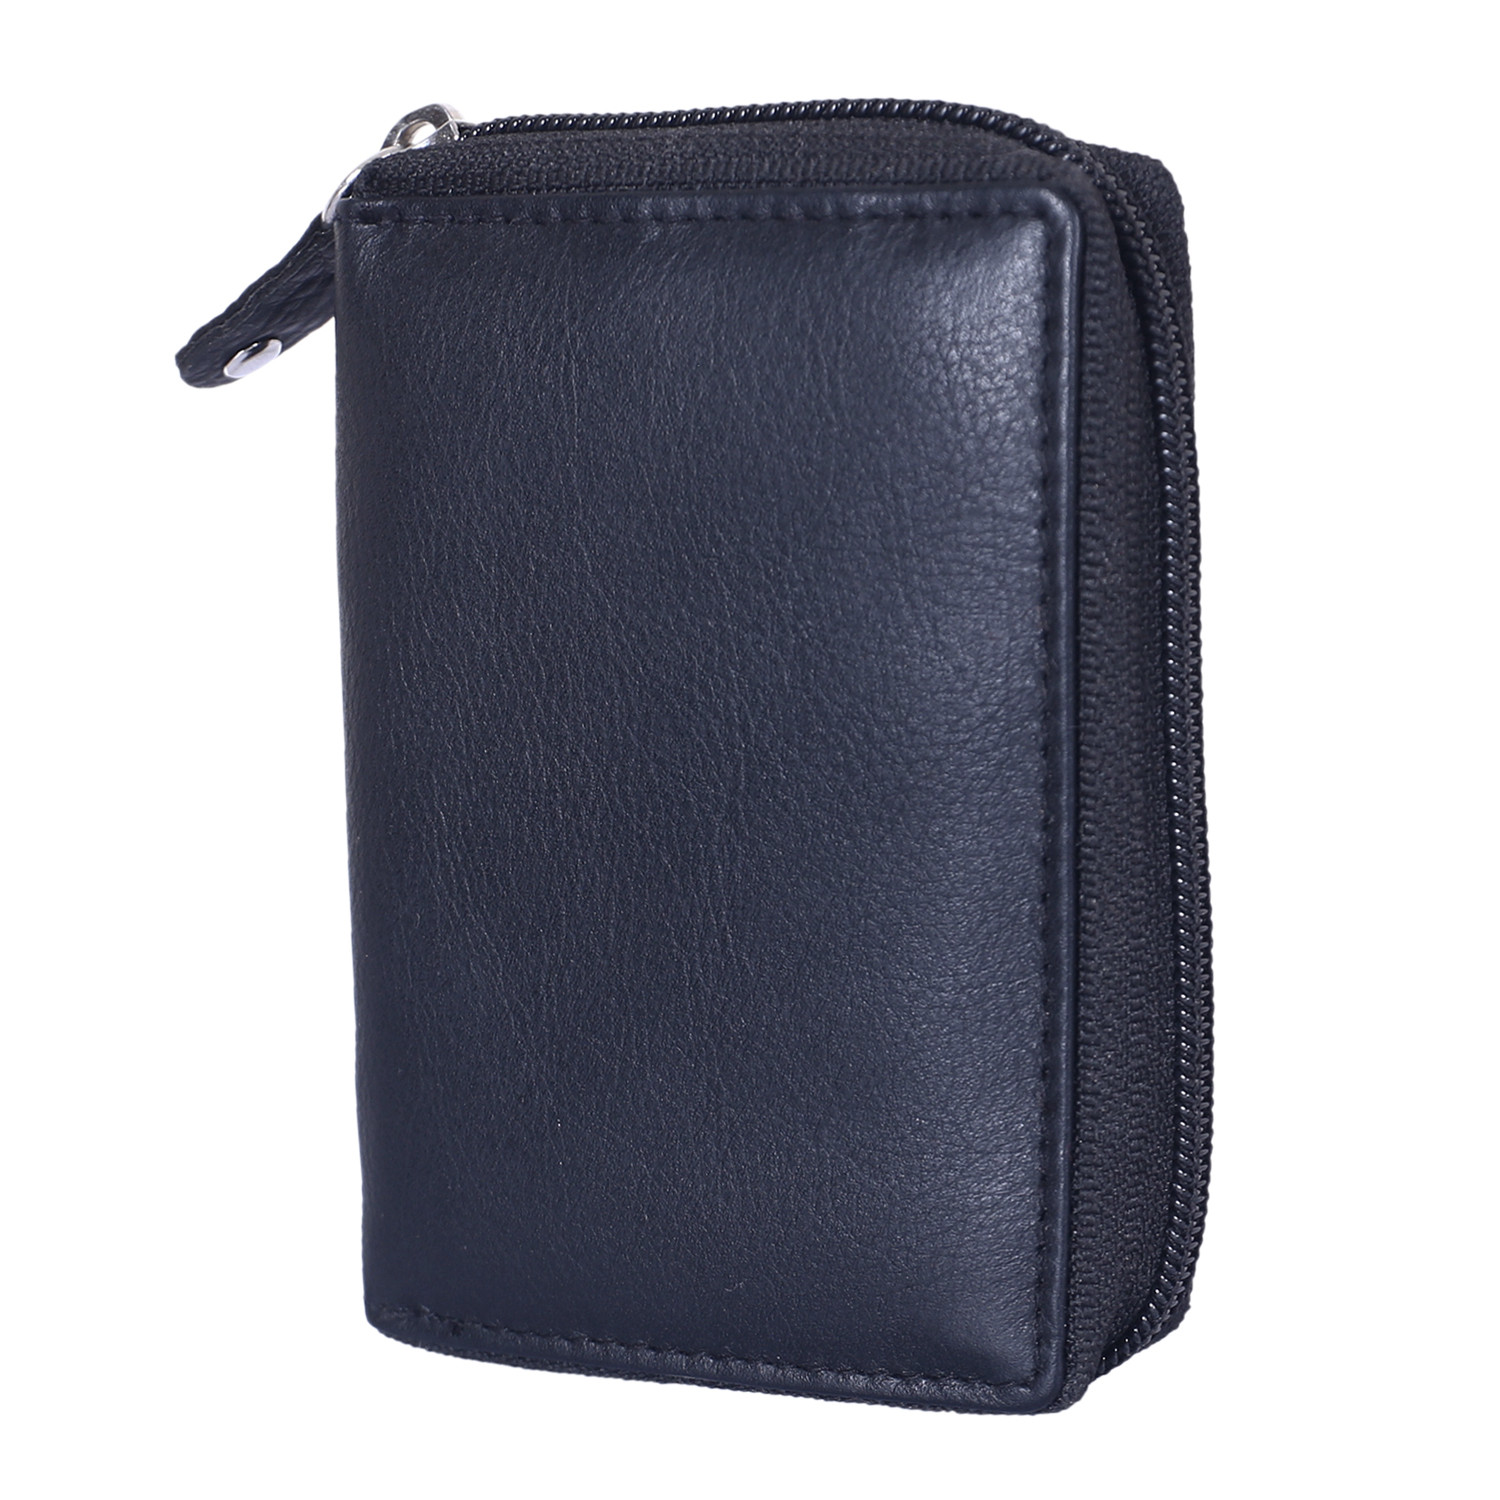 Kuber Industries Soft Leather Card Holder | Zipper Wallet For Man & Woman With 11 Slot (Black)